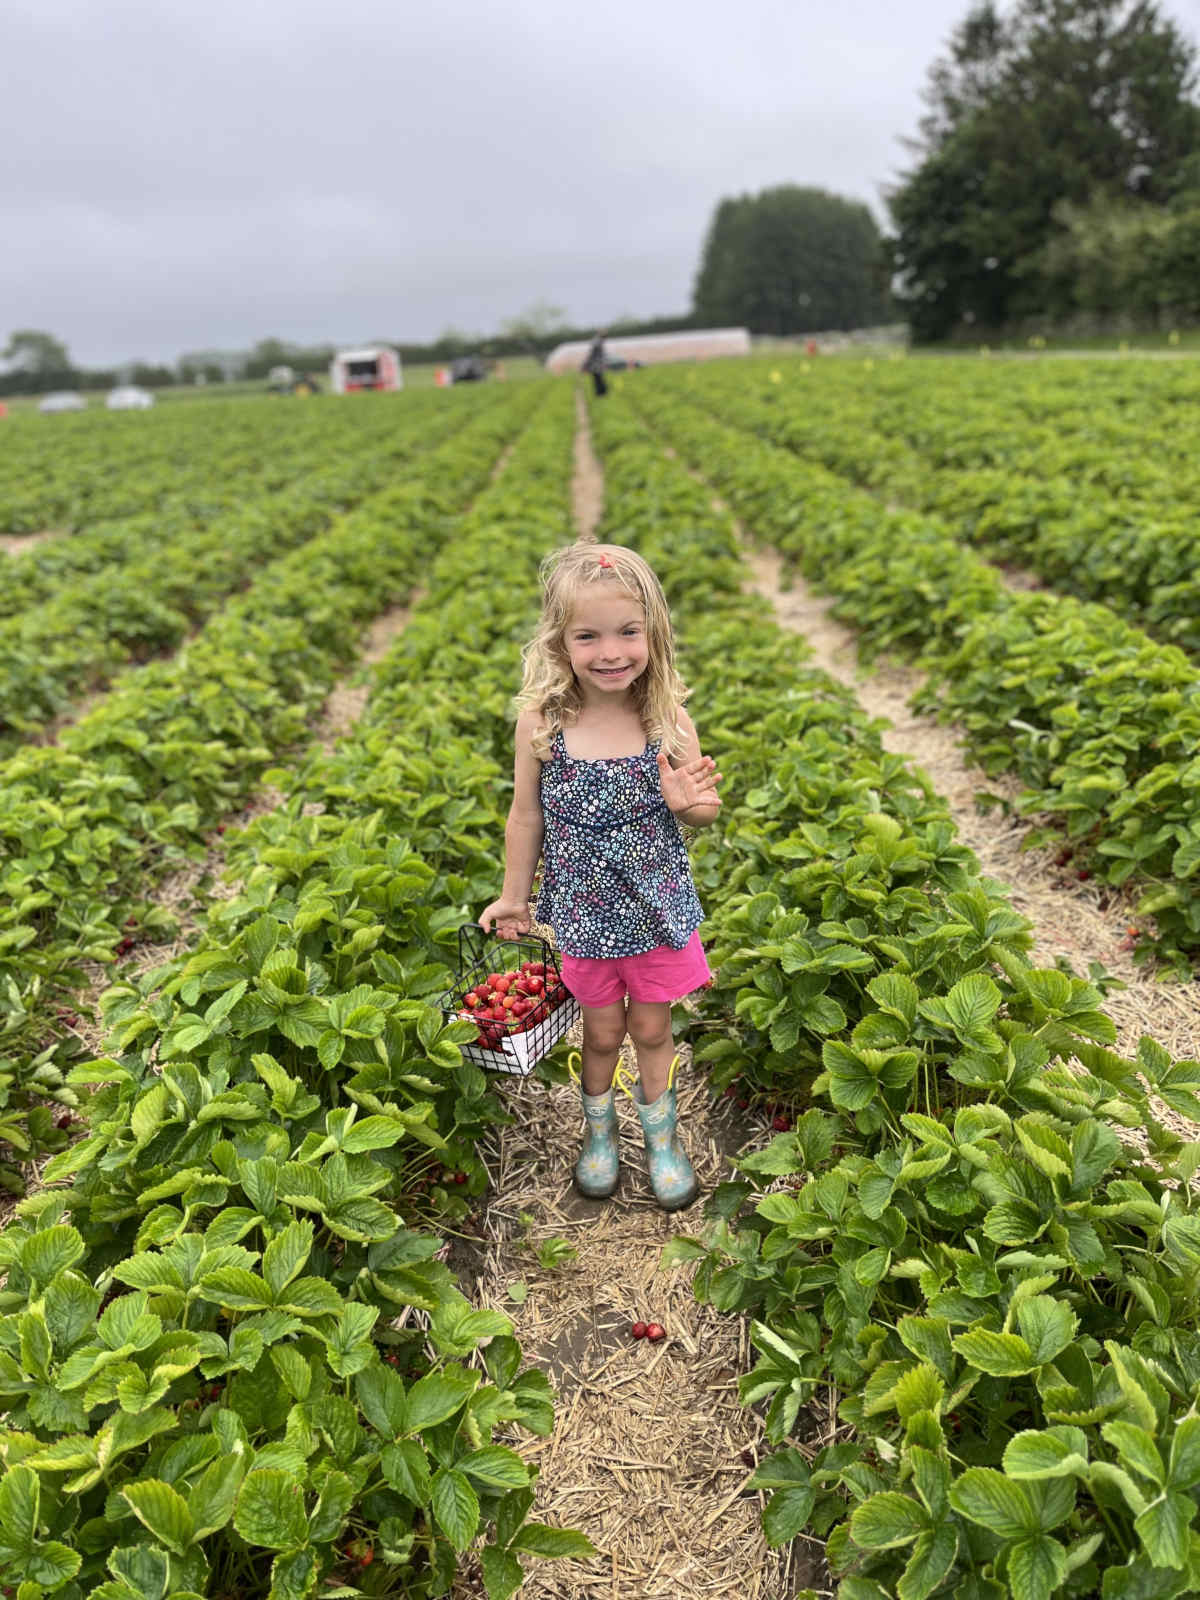 Young girl smiling in a strawberry field with a basket